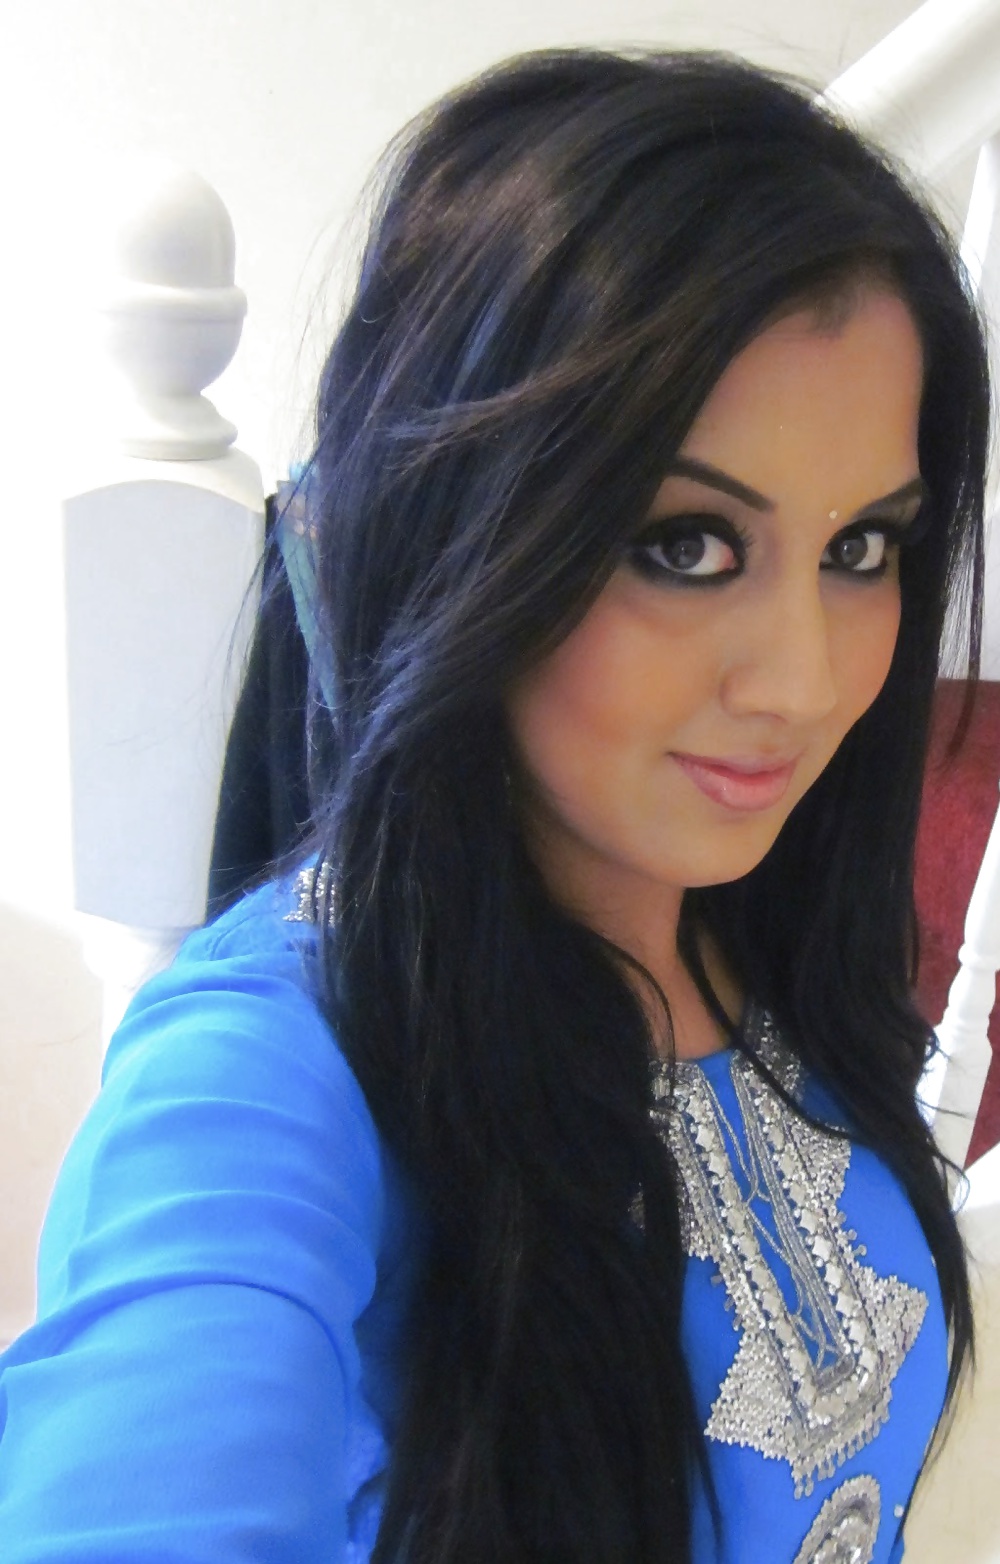 Mevish: Young Pakistani Milf -FOR COMMENTS #29494982